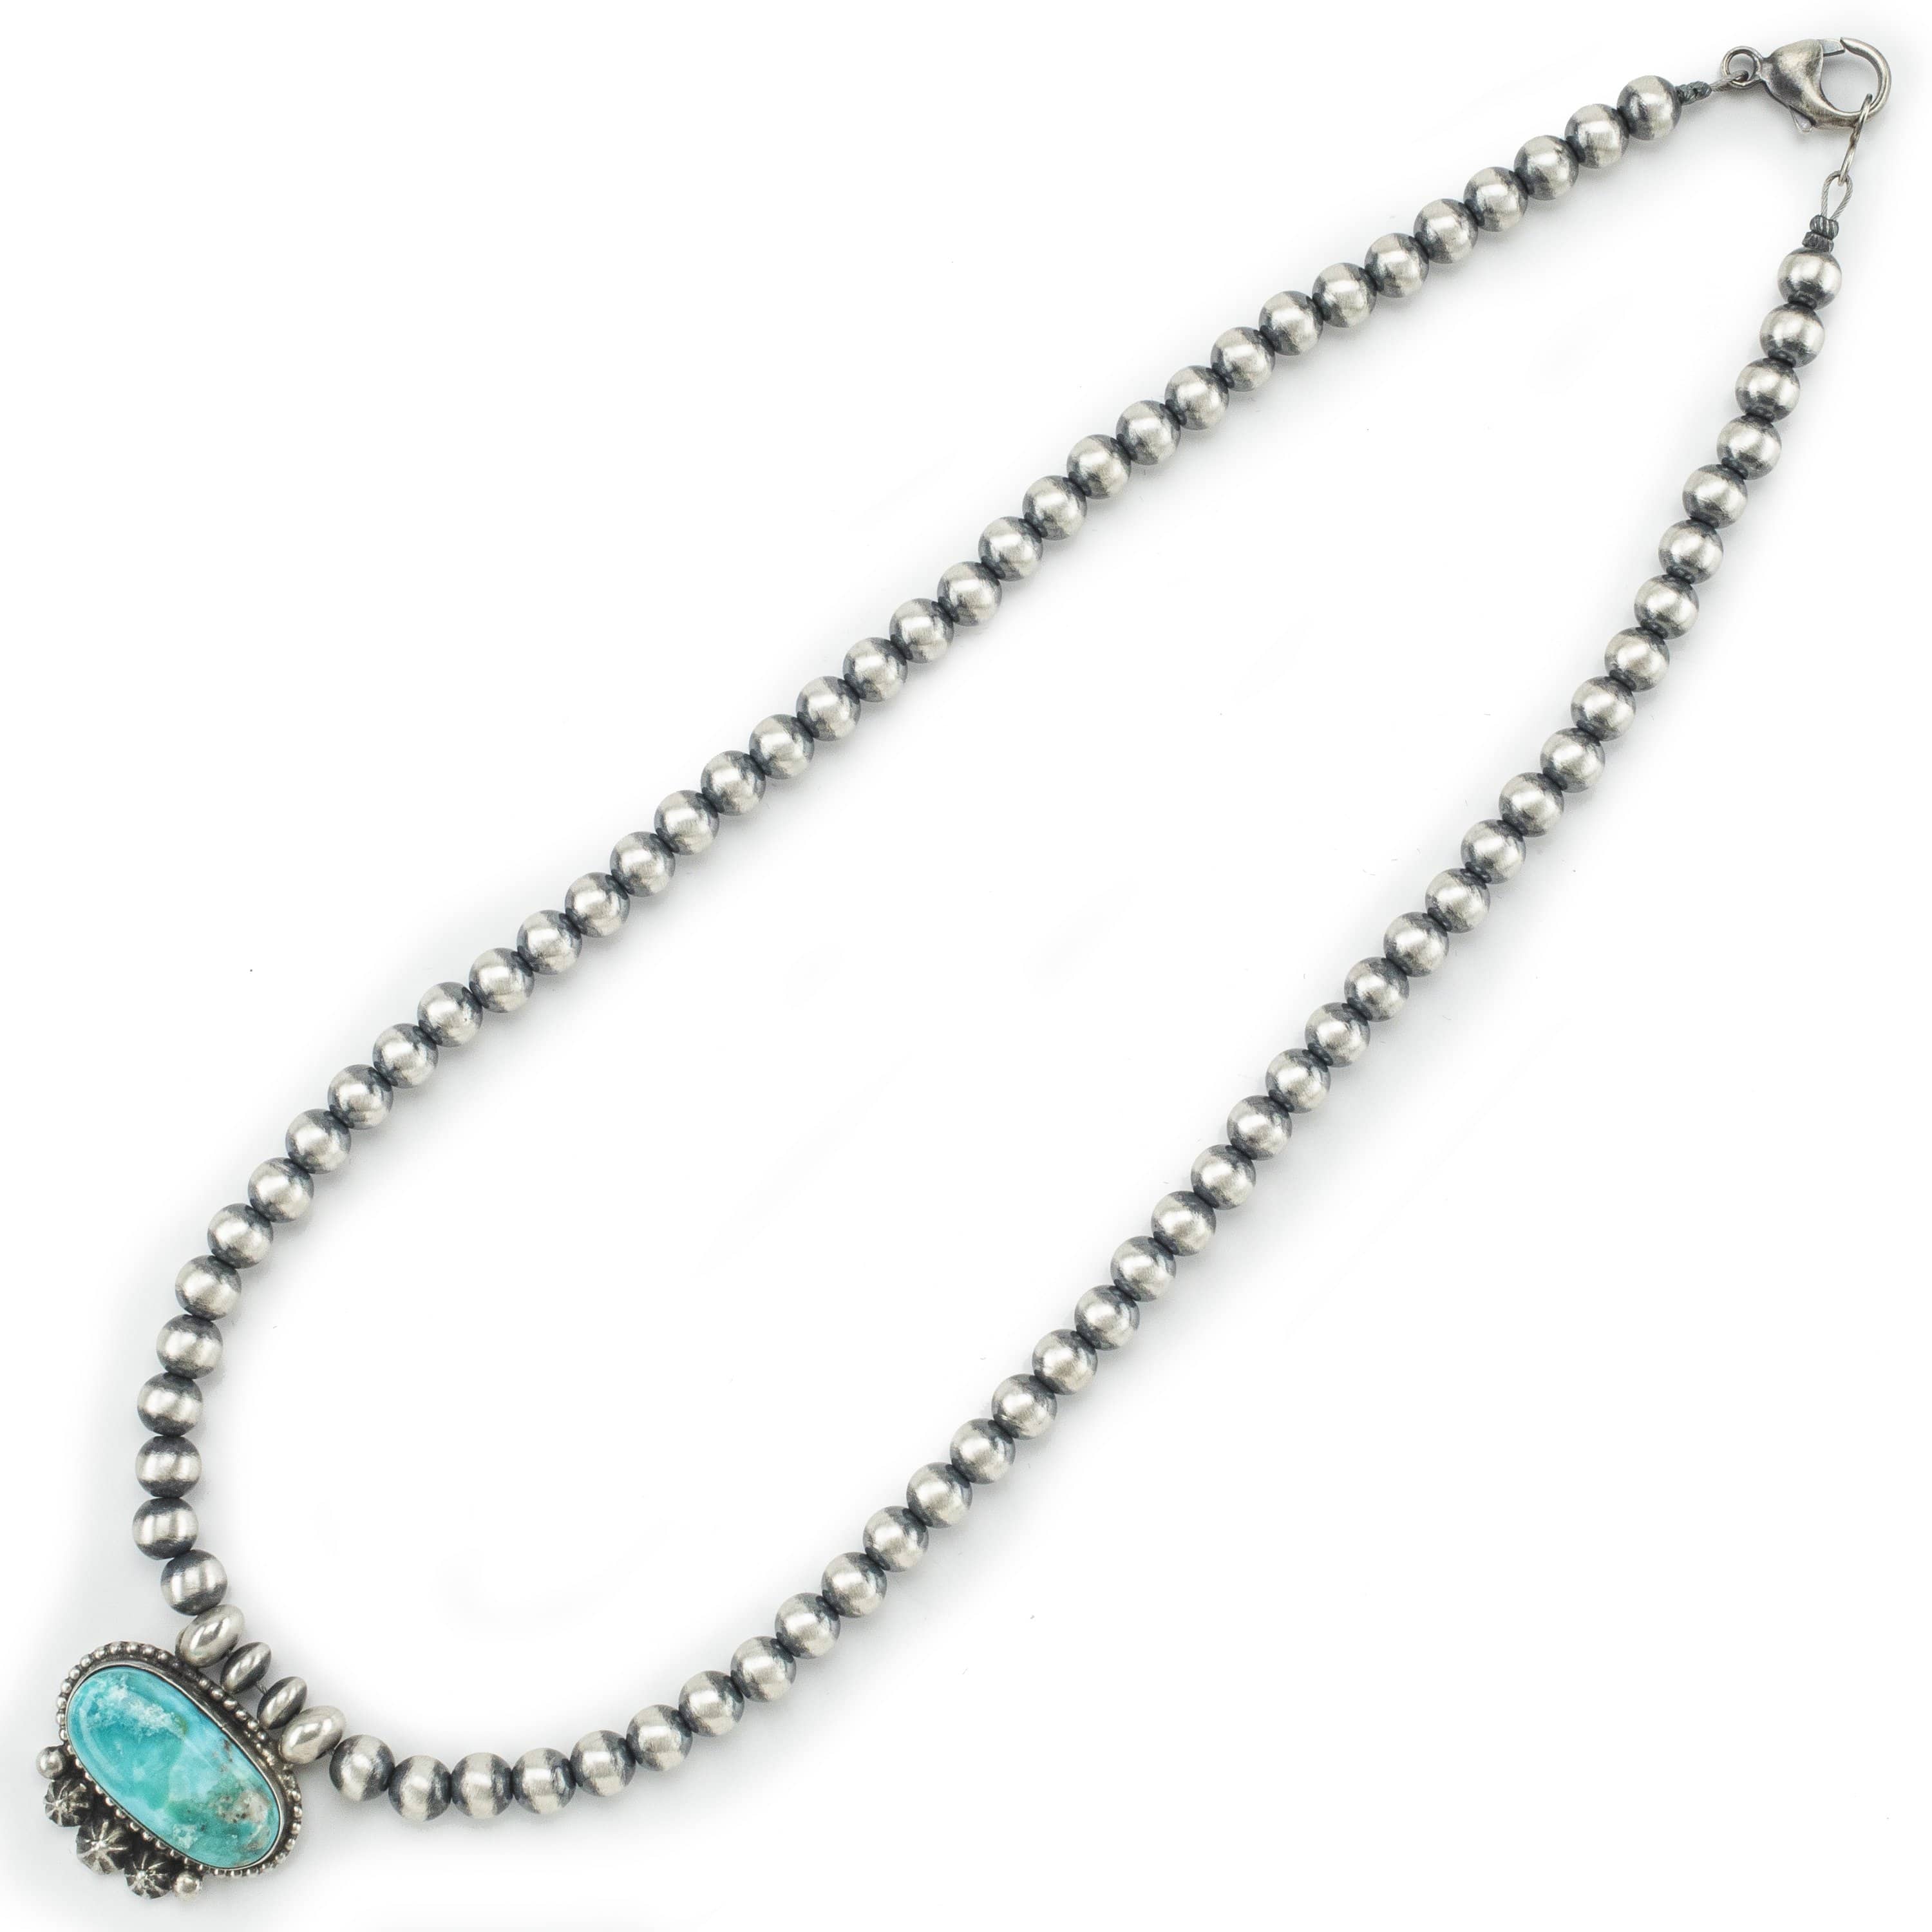 Kalifano Native American Jewelry Kee-J Sonoran Rose Turquoise Pendant and Attached Navajo Pearl USA Native American Made 925 Sterling Silver Necklace NAN1300.002